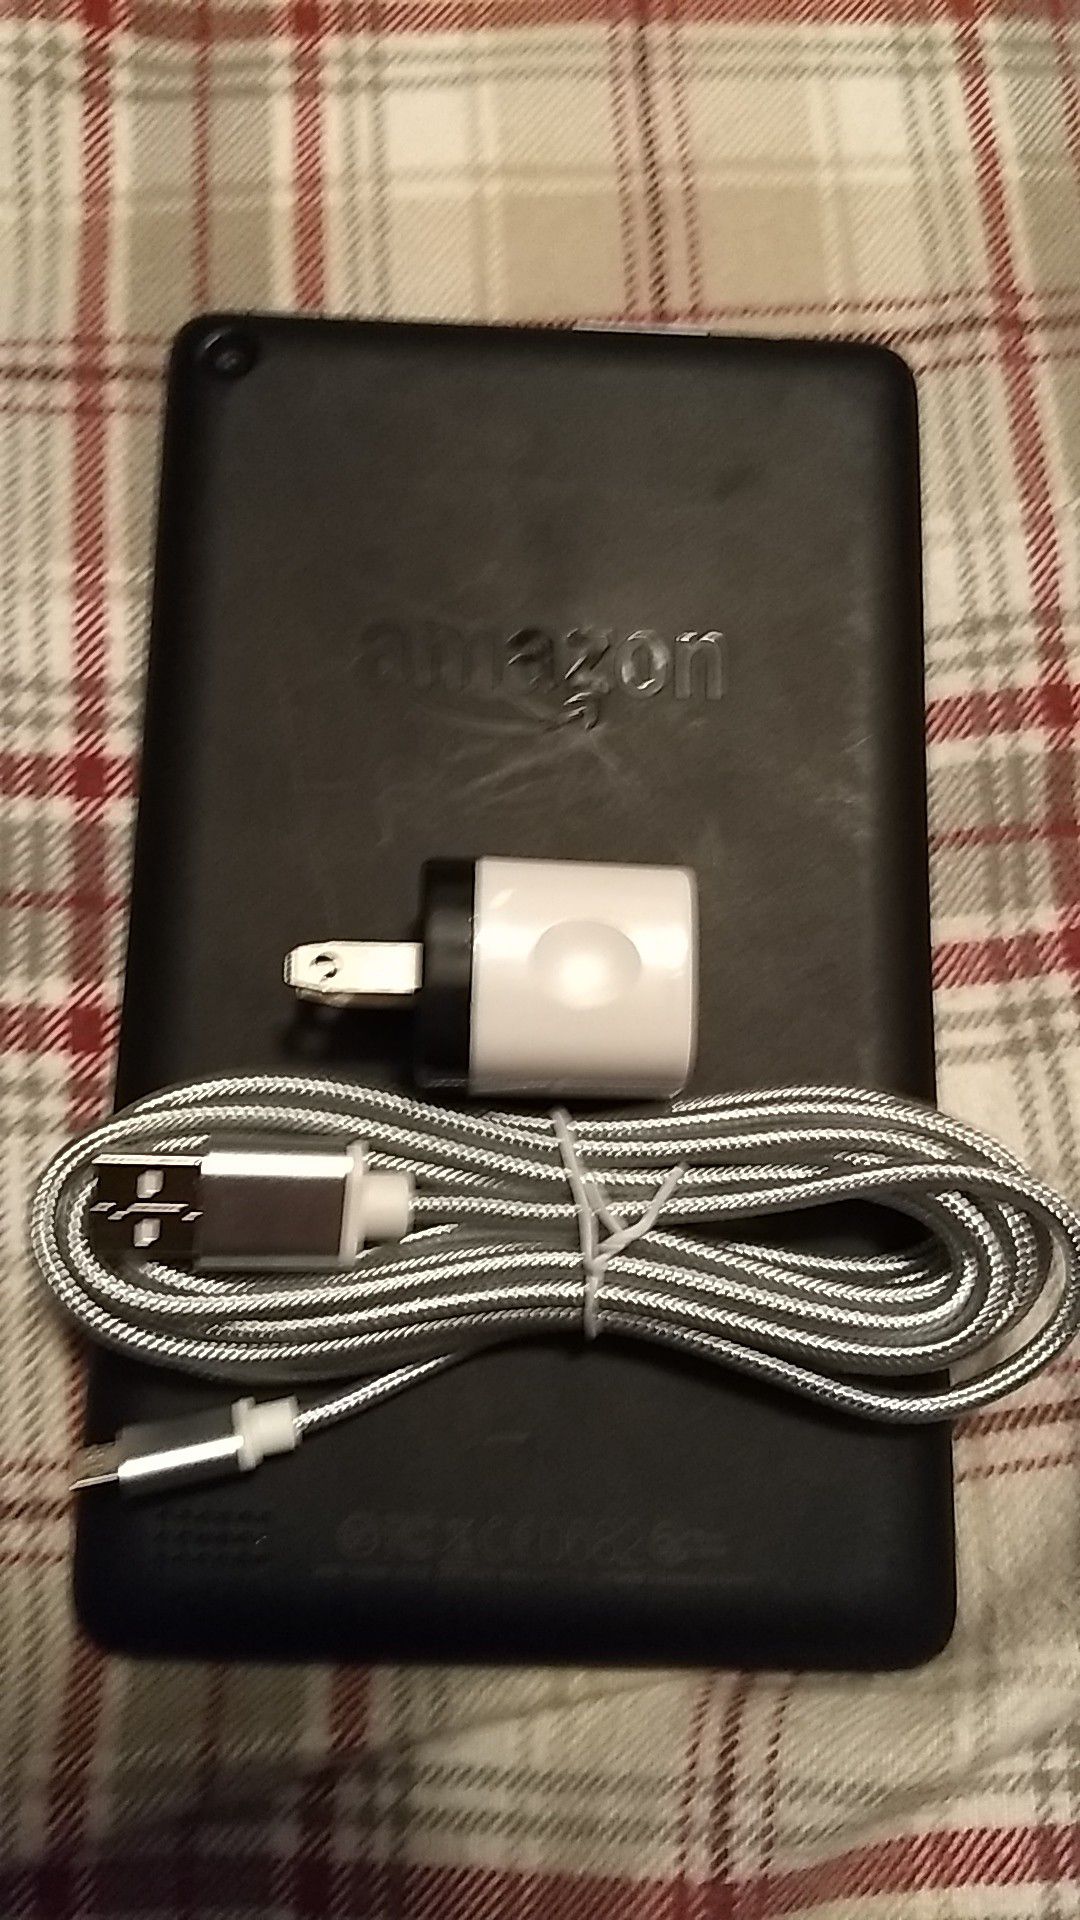 Amazon Fire Tablet - Wall Charger Combo